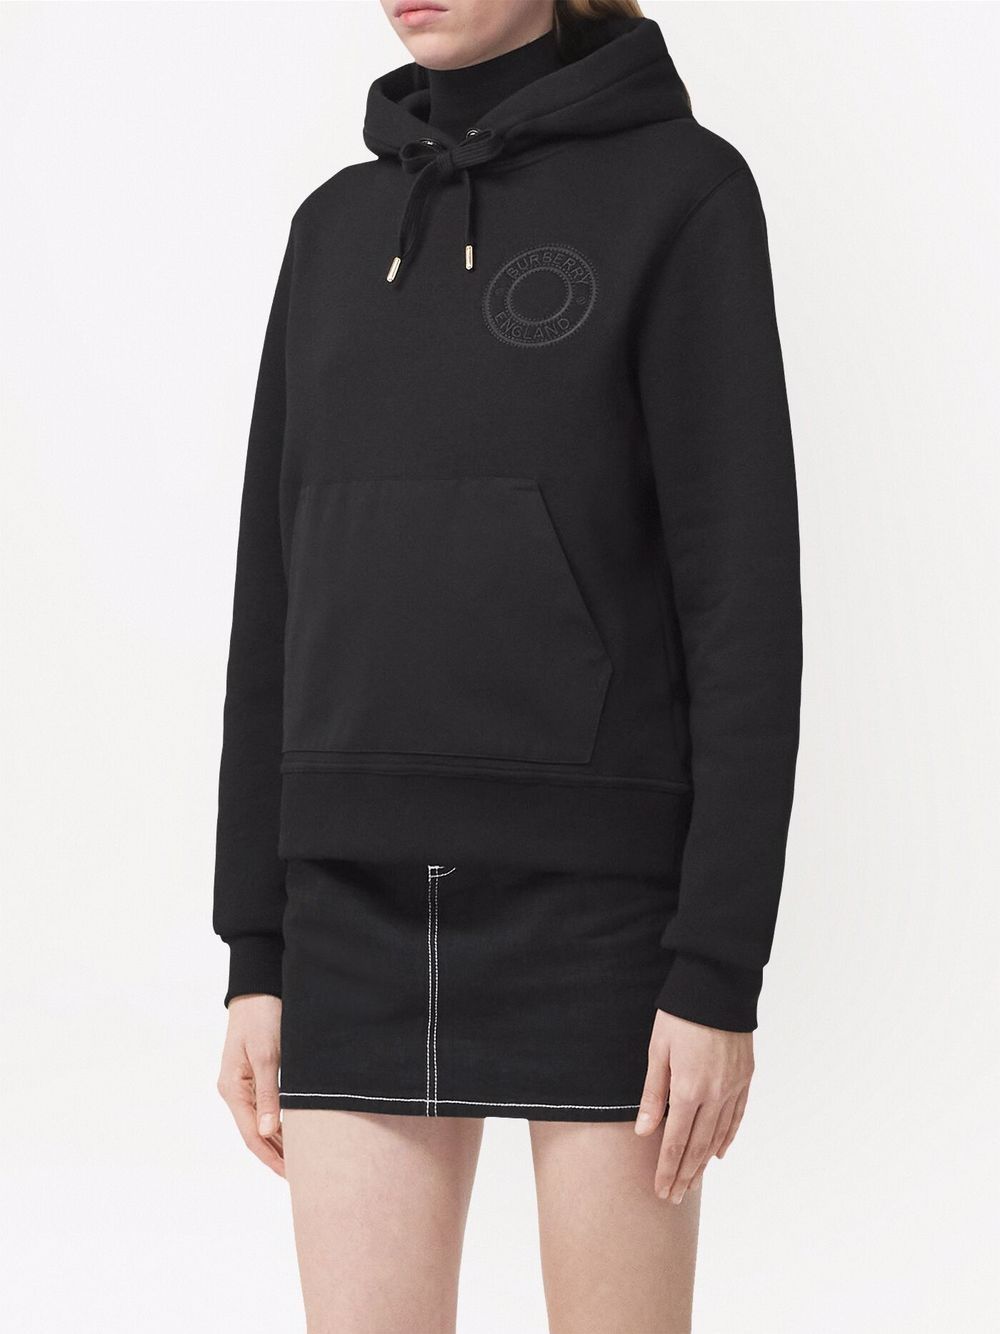 Burberry embroidered-monogram Hoodie - Farfetch